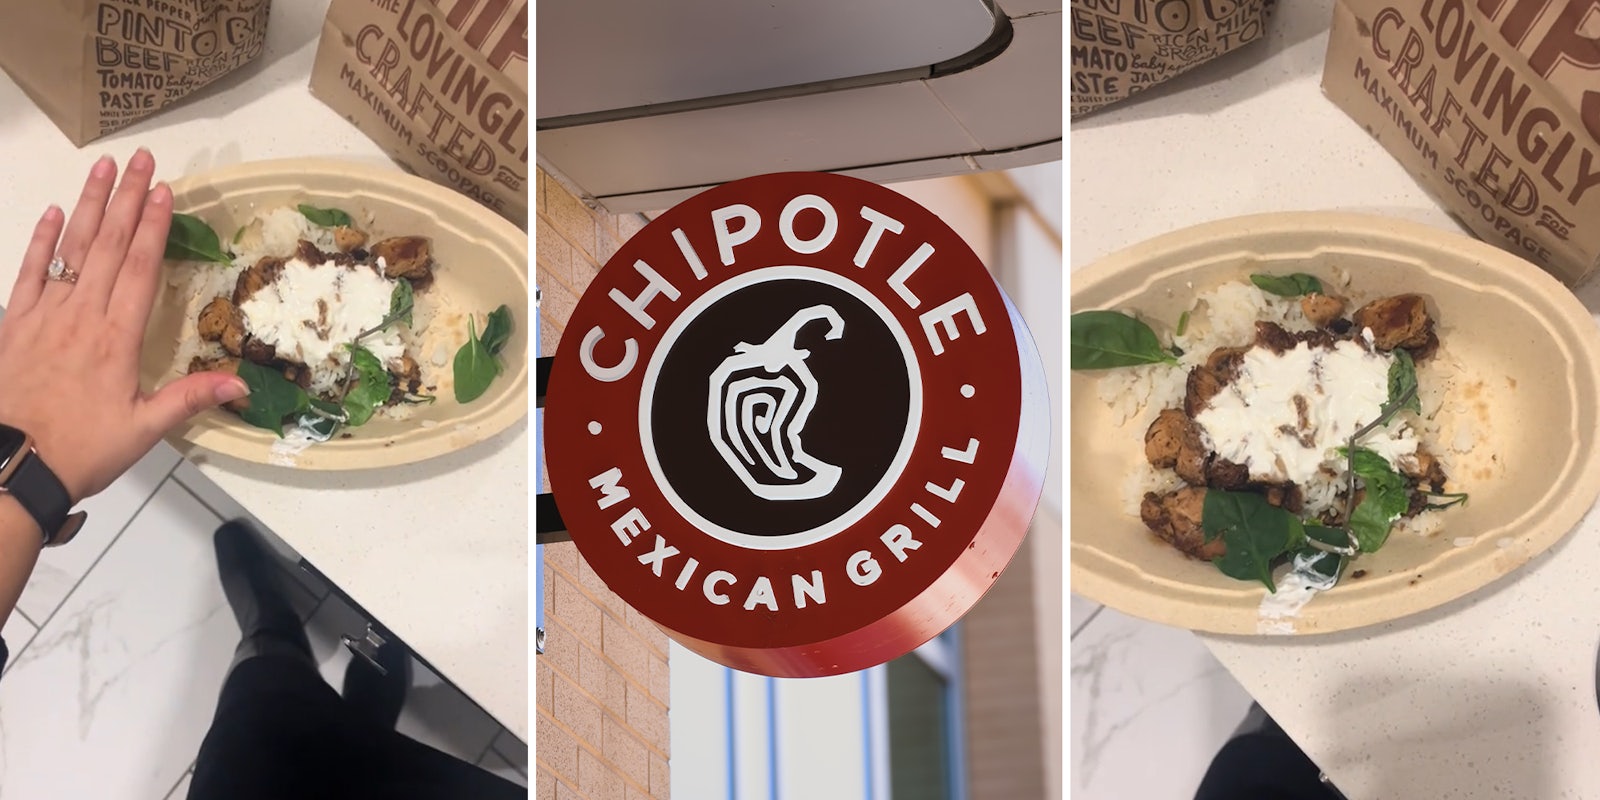 Chipotle customer shows she got less than a fist-full of food in her chicken burrito bowl after ordering online